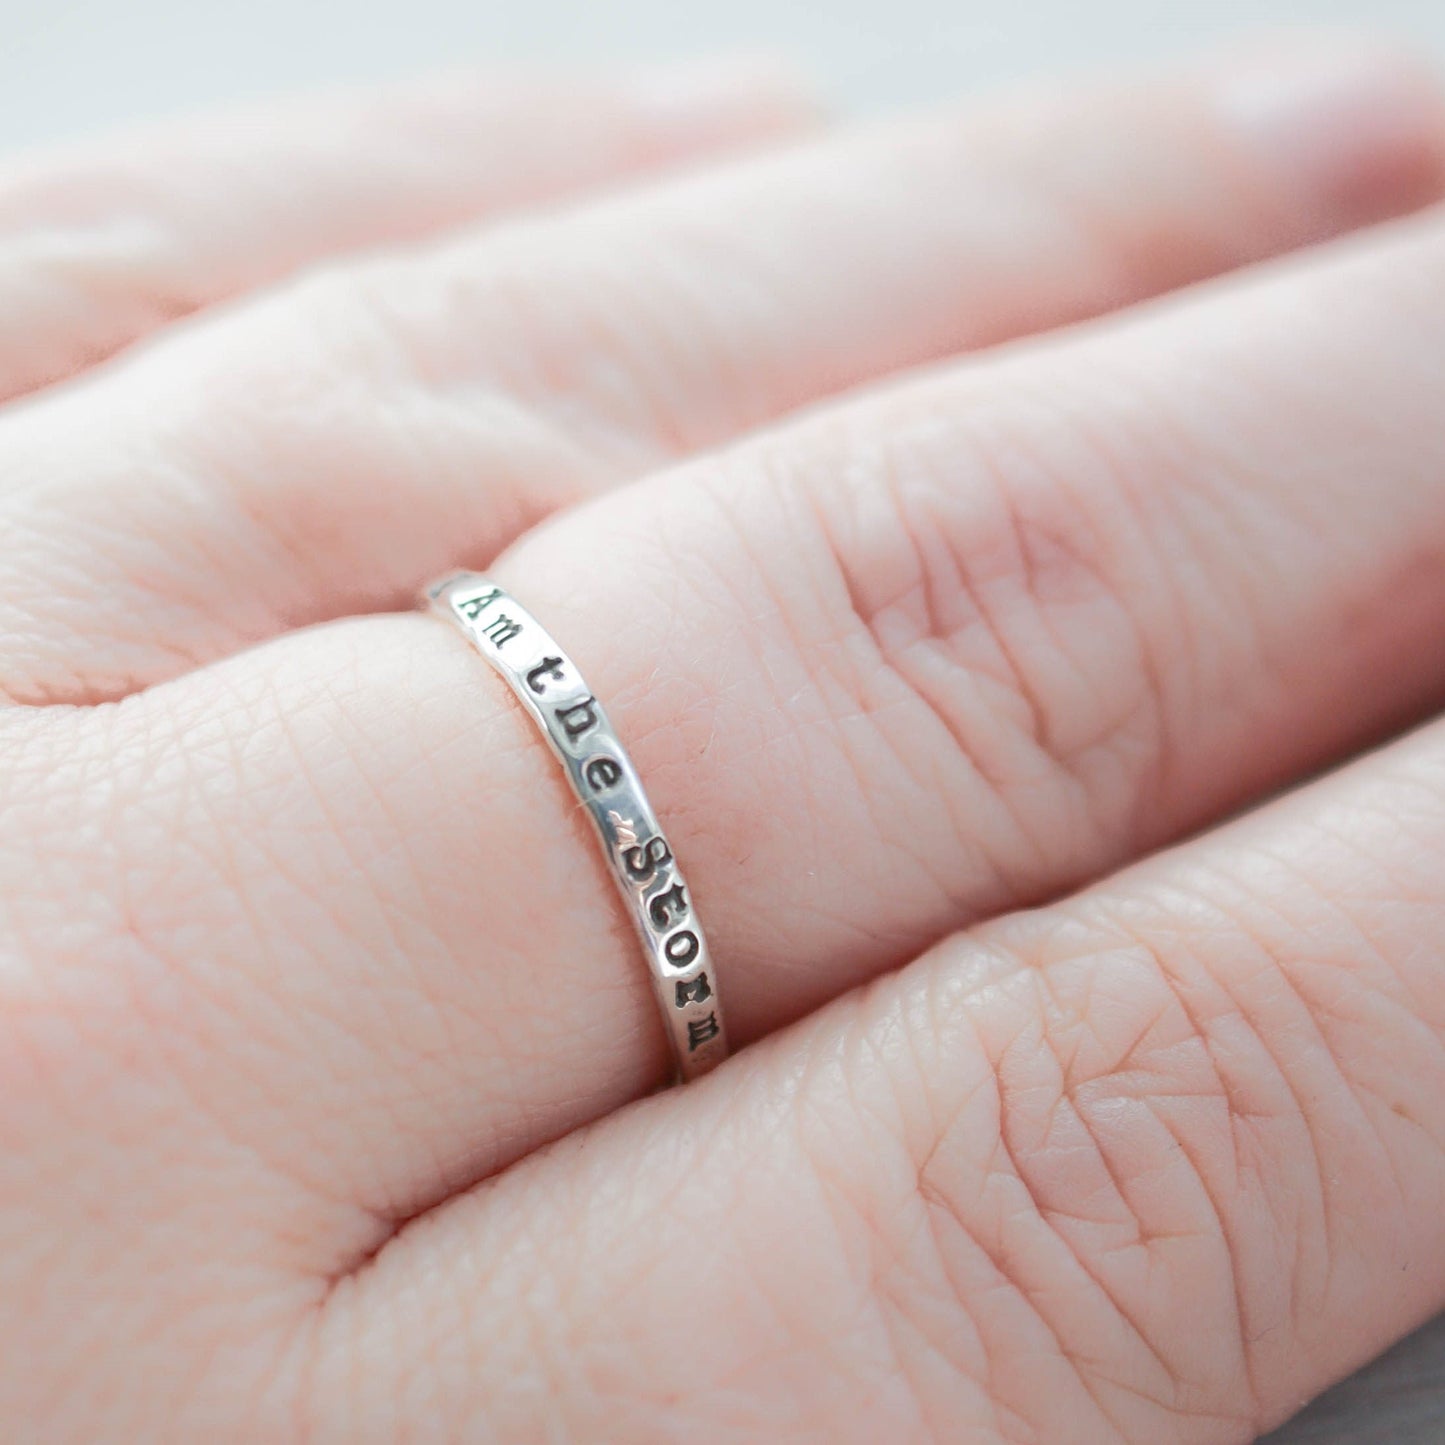 Image of I am the storm stackable ring on hand